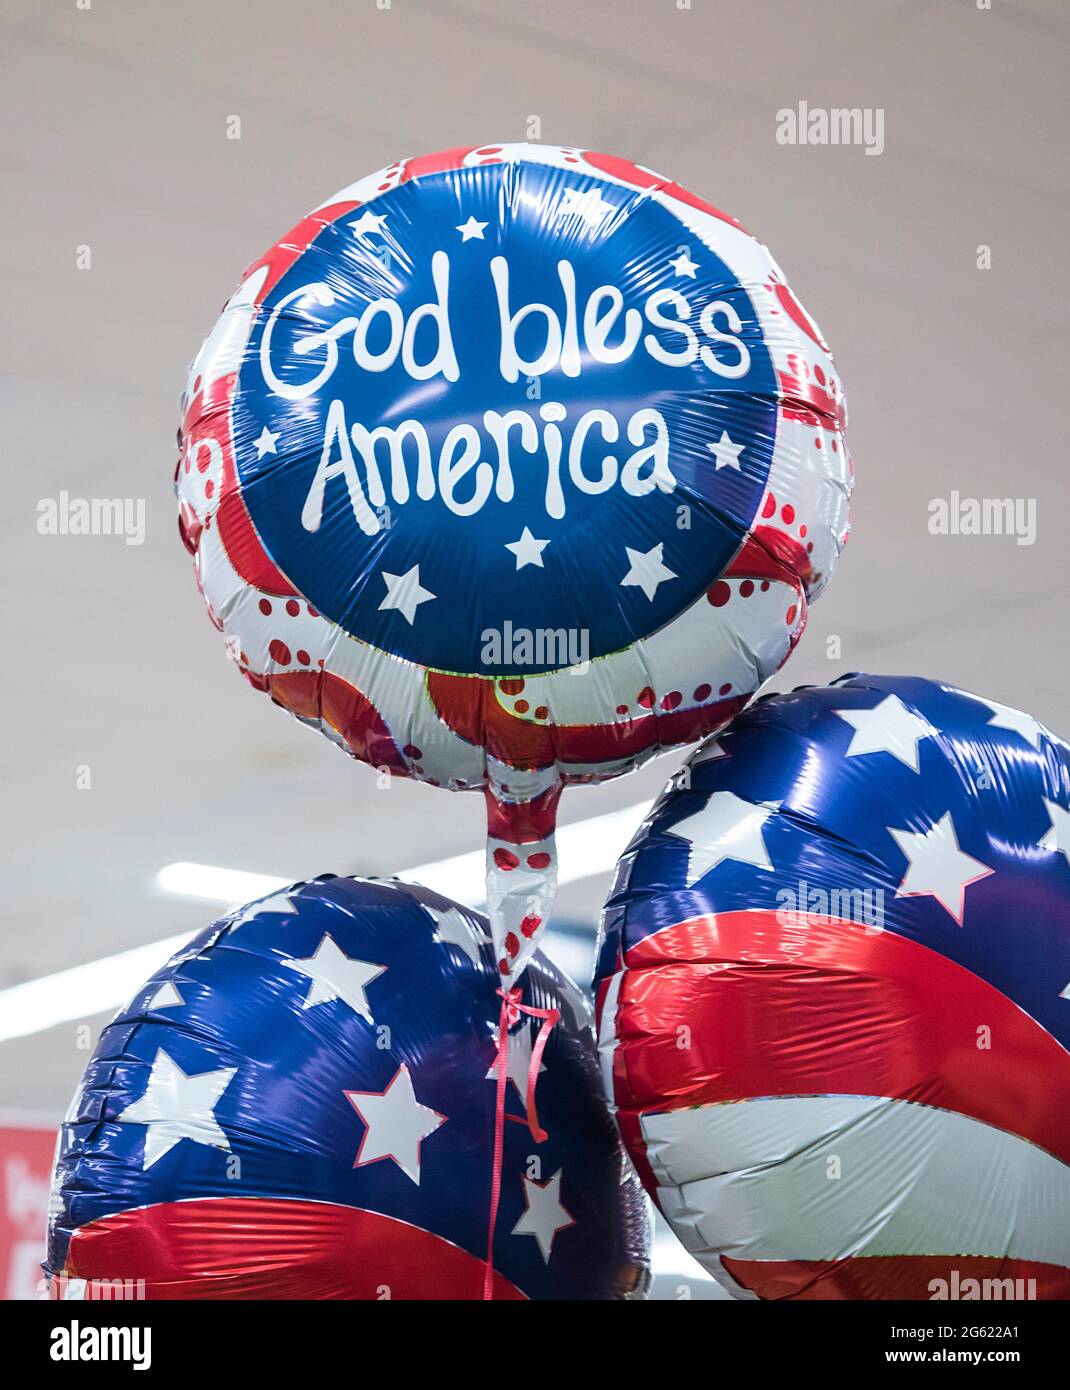 Fourth Of July, God Bless America, celebration balloons for sale in a department store in North Central Florida. Stock Photo